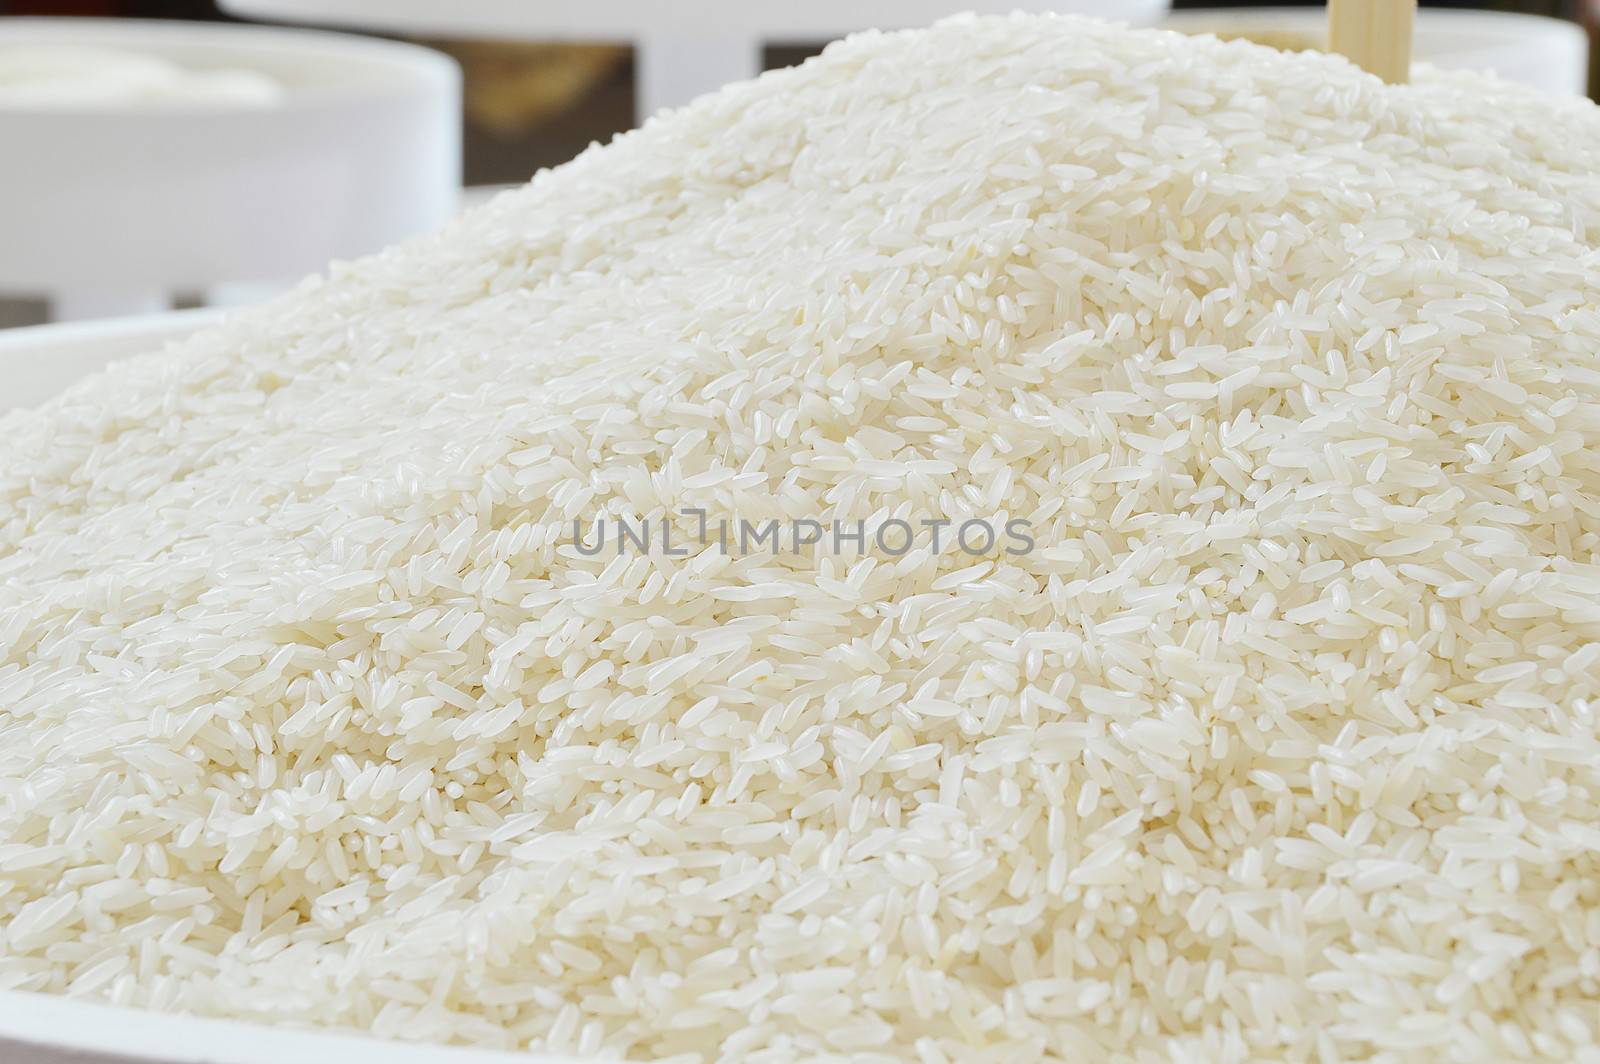 White long rice background, uncooked by Lekchangply